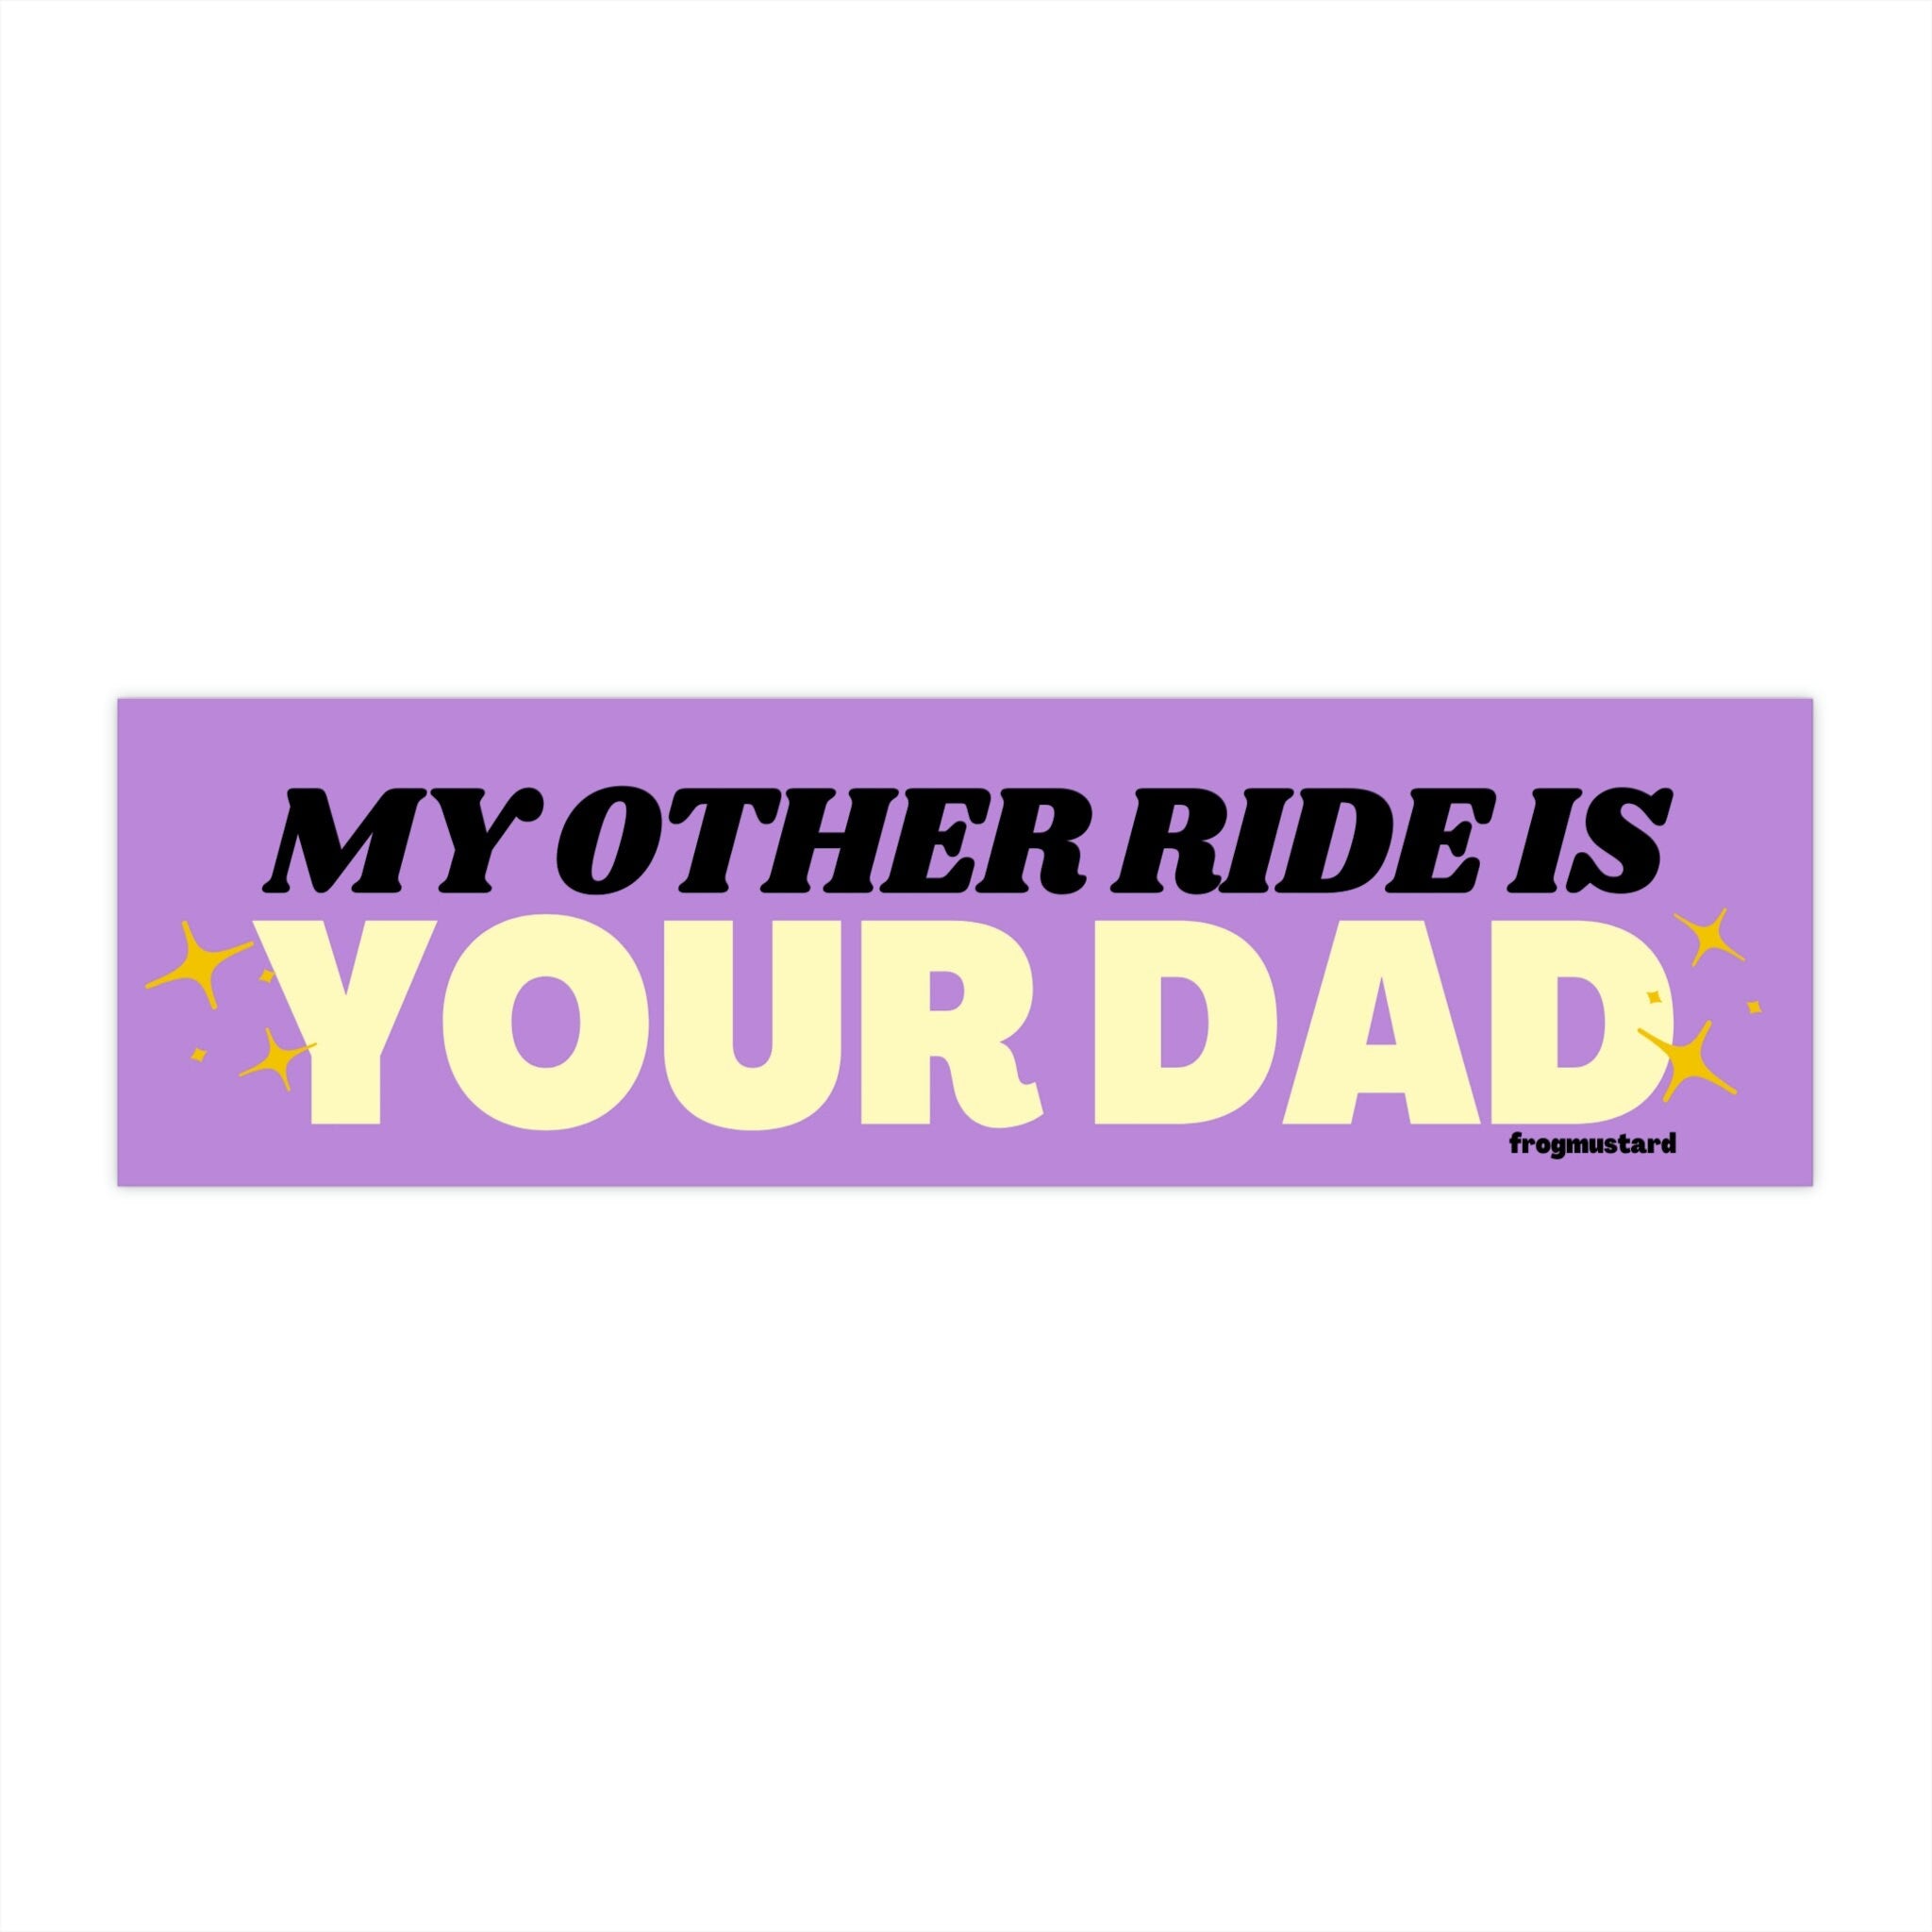 My other ride is your dad | 8.5" x 2.5" | Gen Z Humor | Bumper Sticker OR Magnet